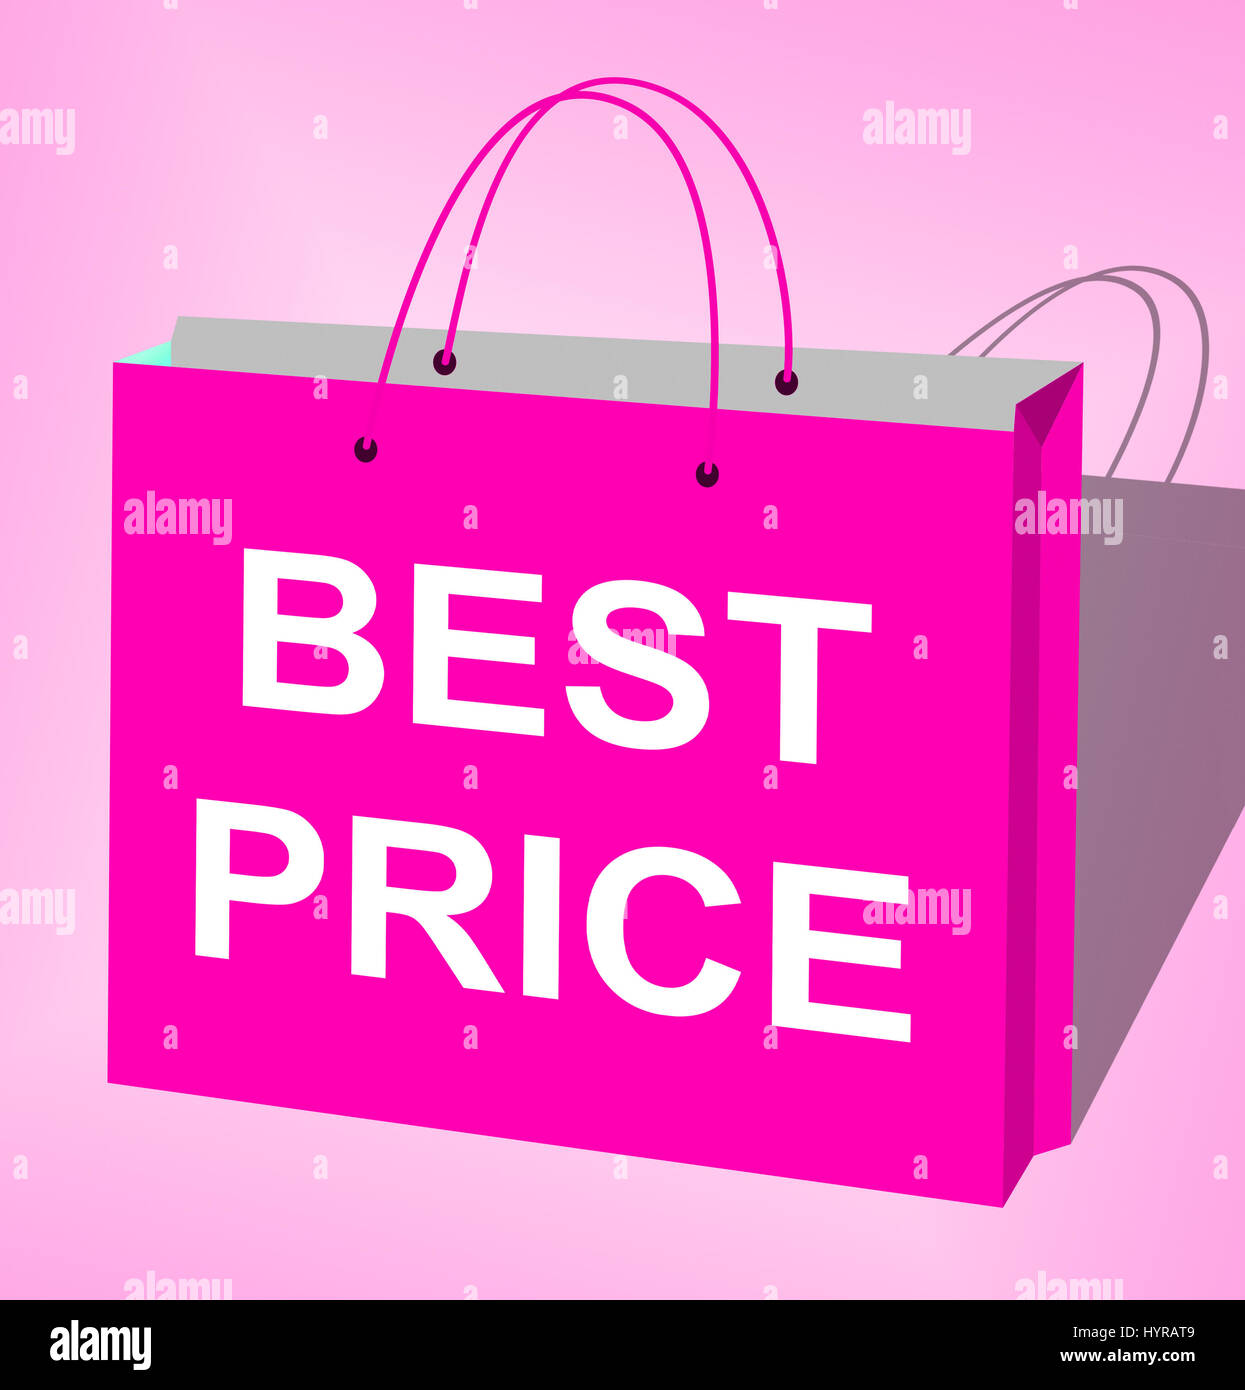 Best Price On Shopping Bags Displays